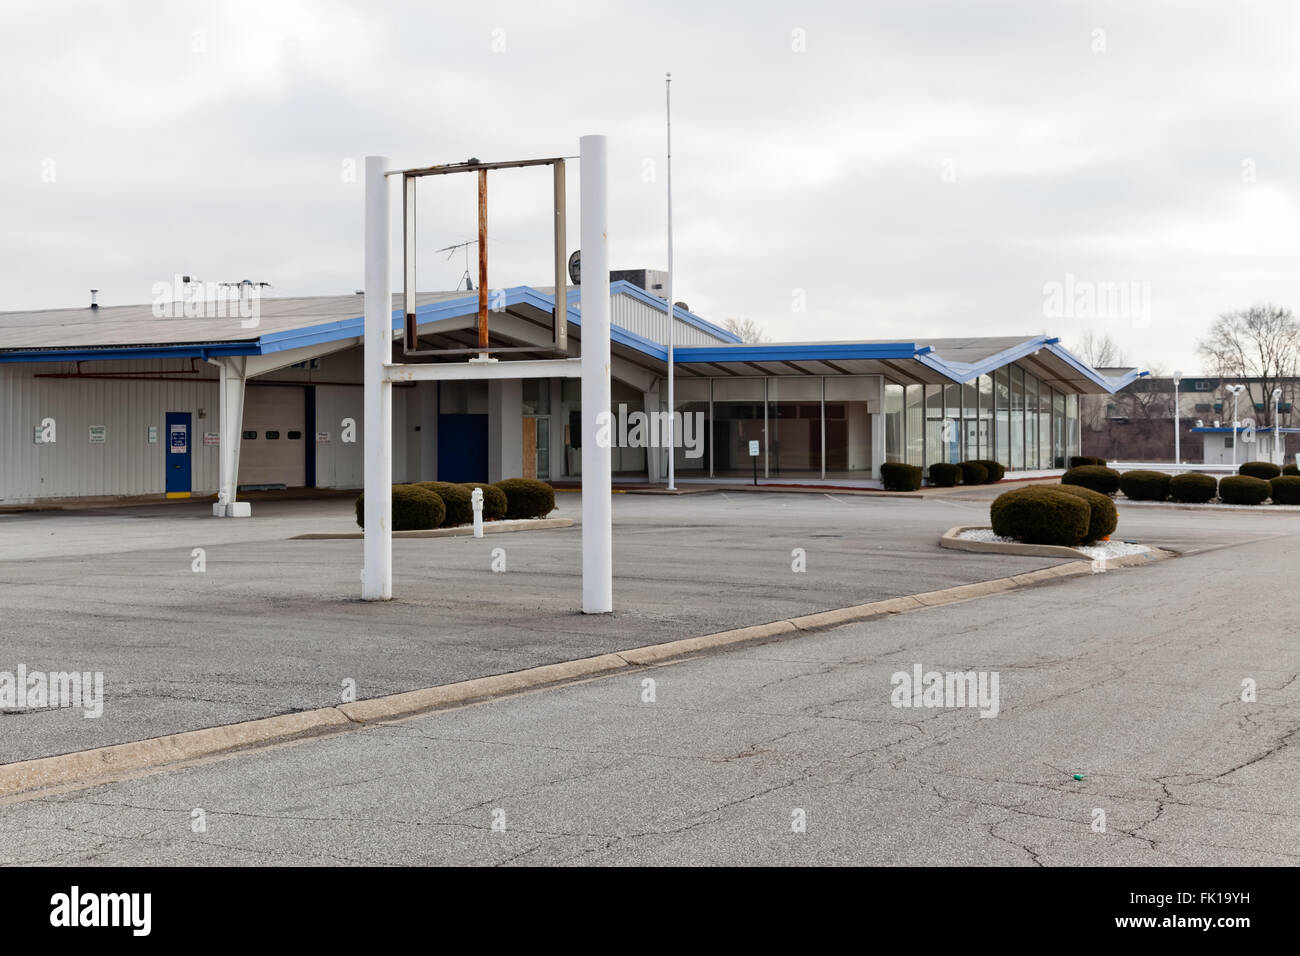 Car dealer out of business. Dealership signs have been removed and the building is closed, vacant and empty. Stock Photo